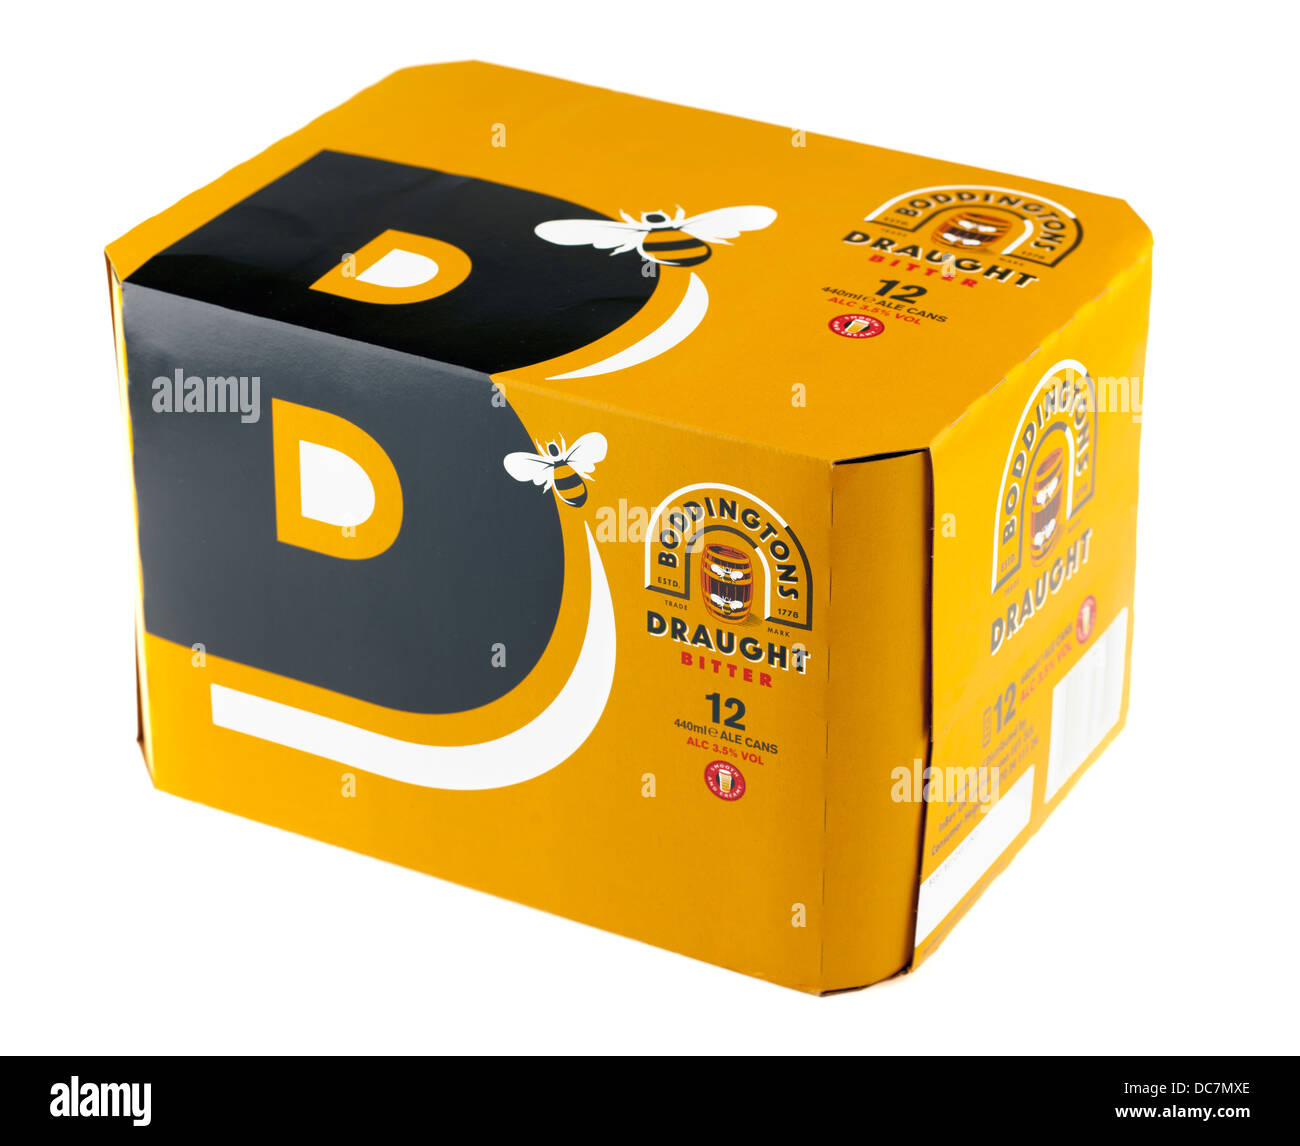 12 can pack of Boddingtons draught bitter ale Stock Photo